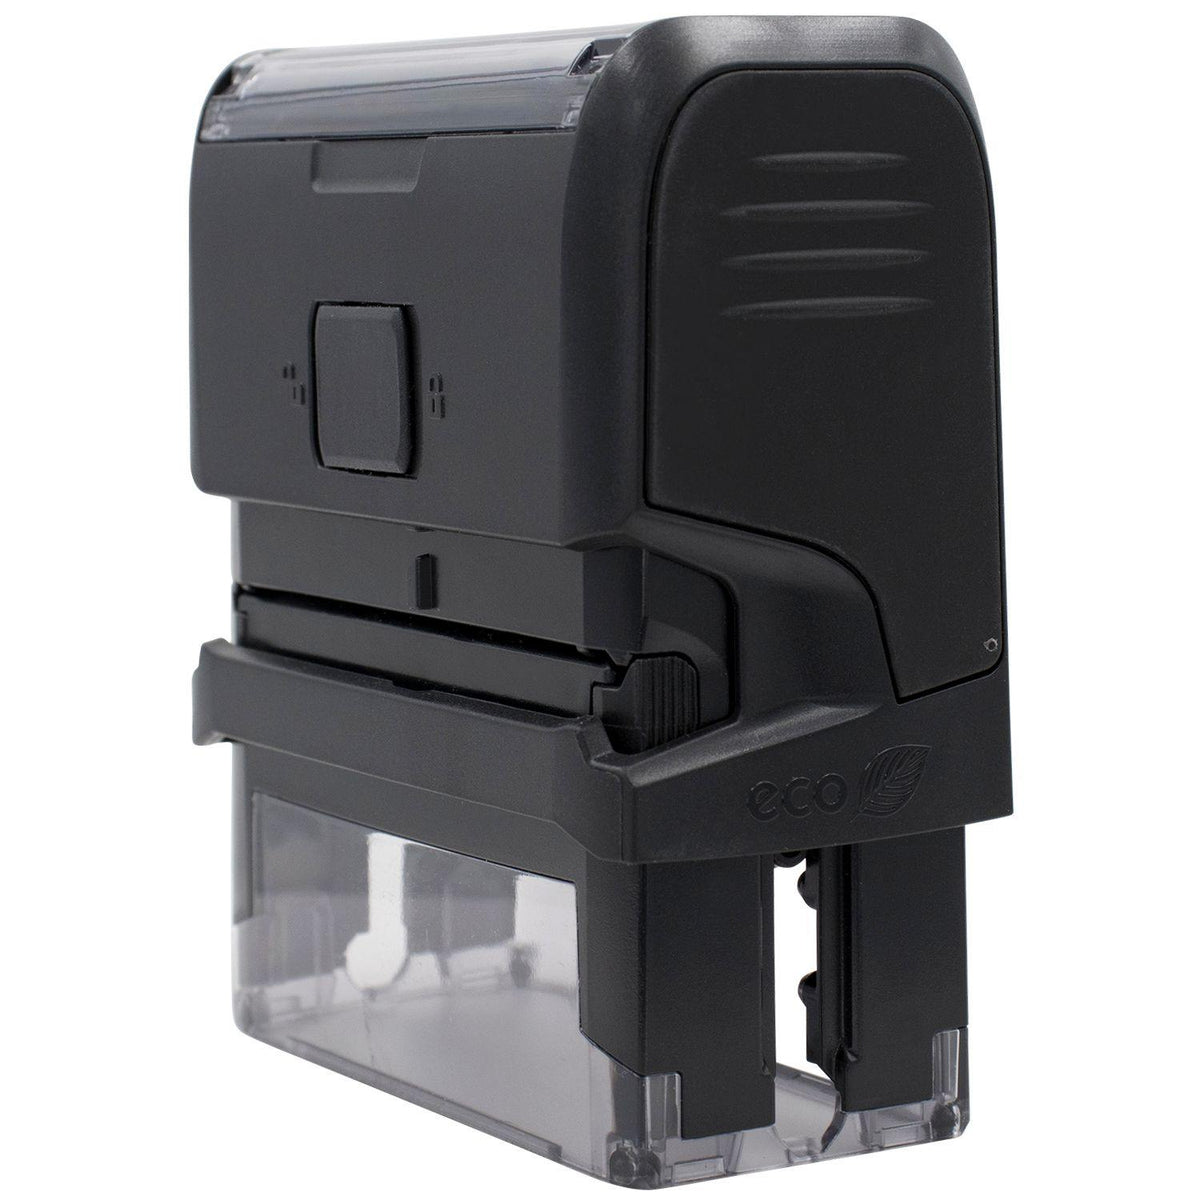 Self-Inking Spoiled Stamp - Engineer Seal Stamps - Brand_Trodat, Impression Size_Small, Stamp Type_Self-Inking Stamp, Type of Use_Business, Type of Use_General